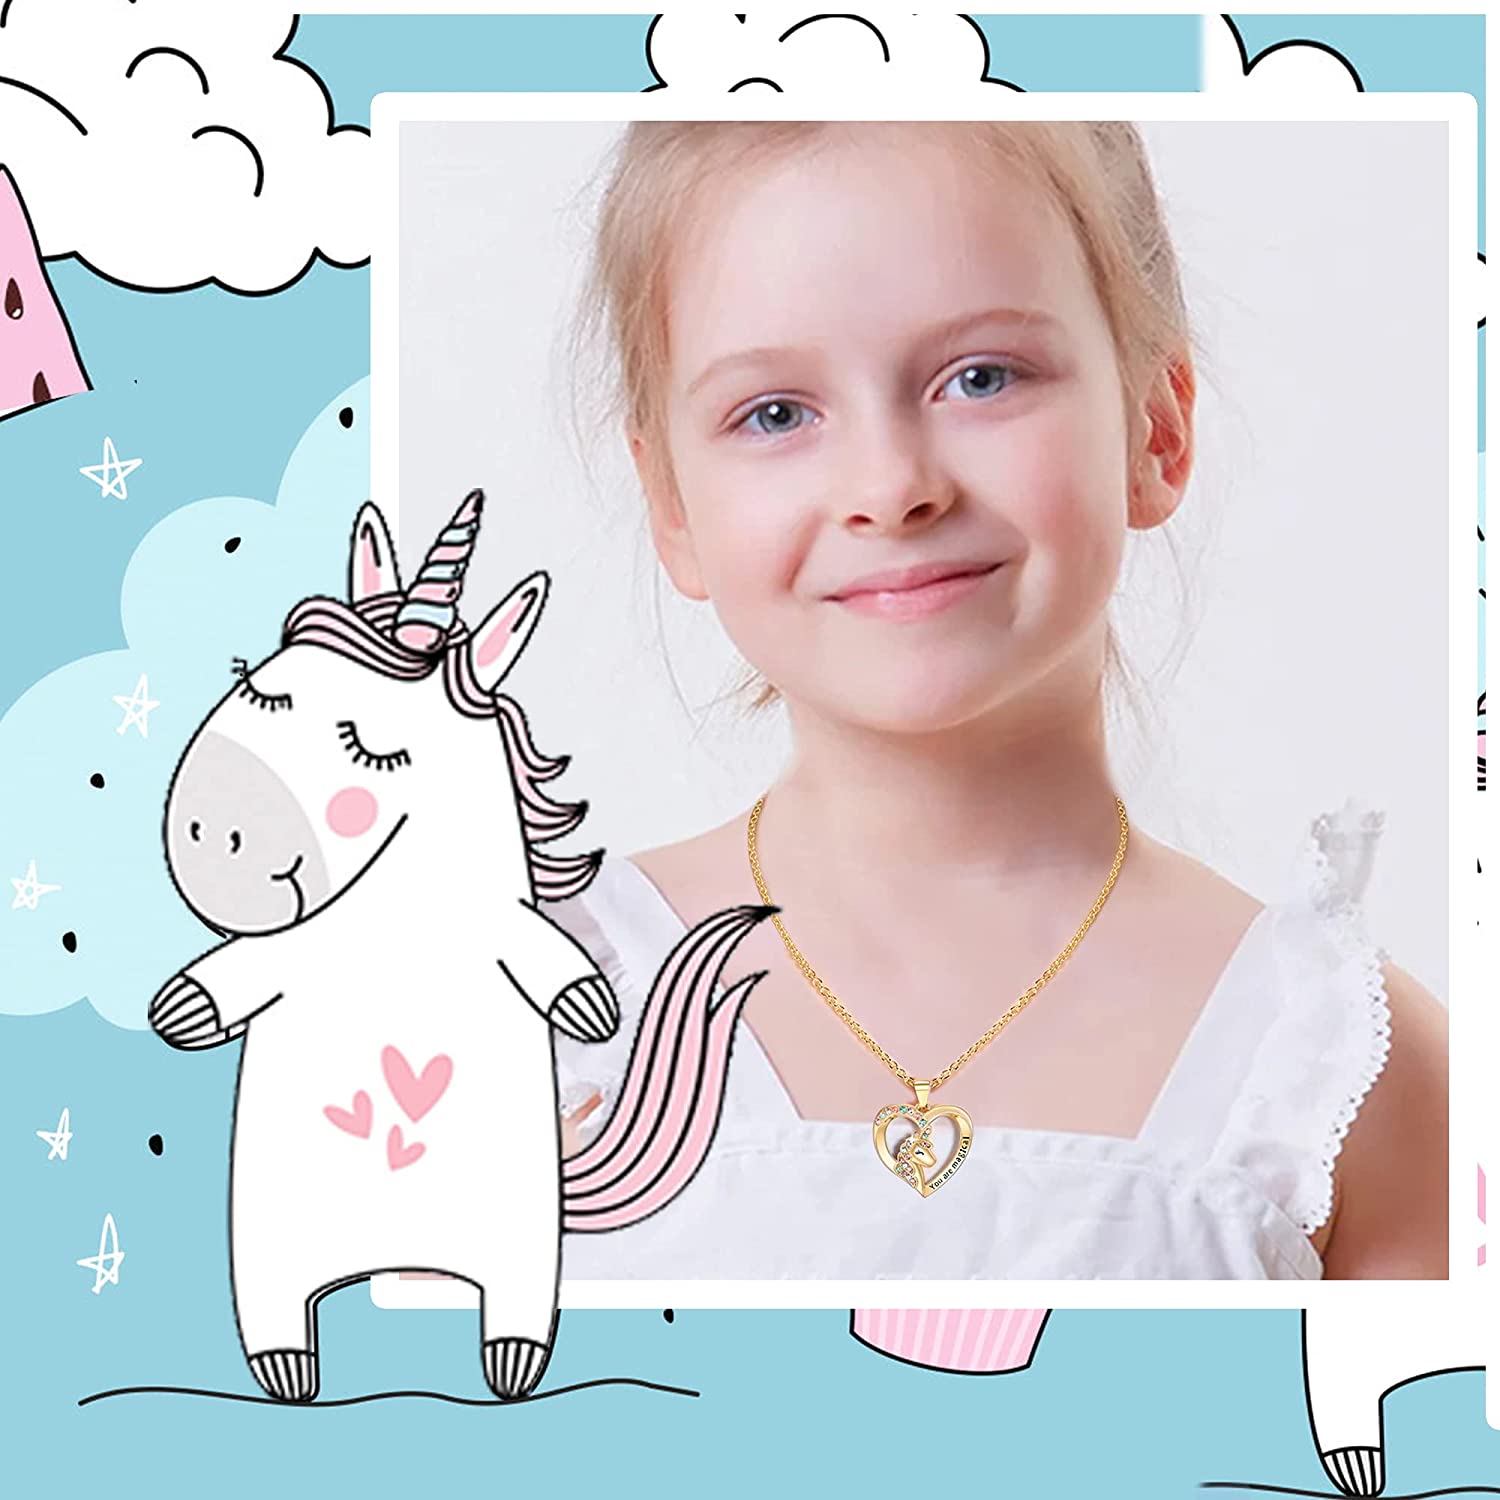 Unicorn Necklace for Women Girls: You Are Magical Necklace